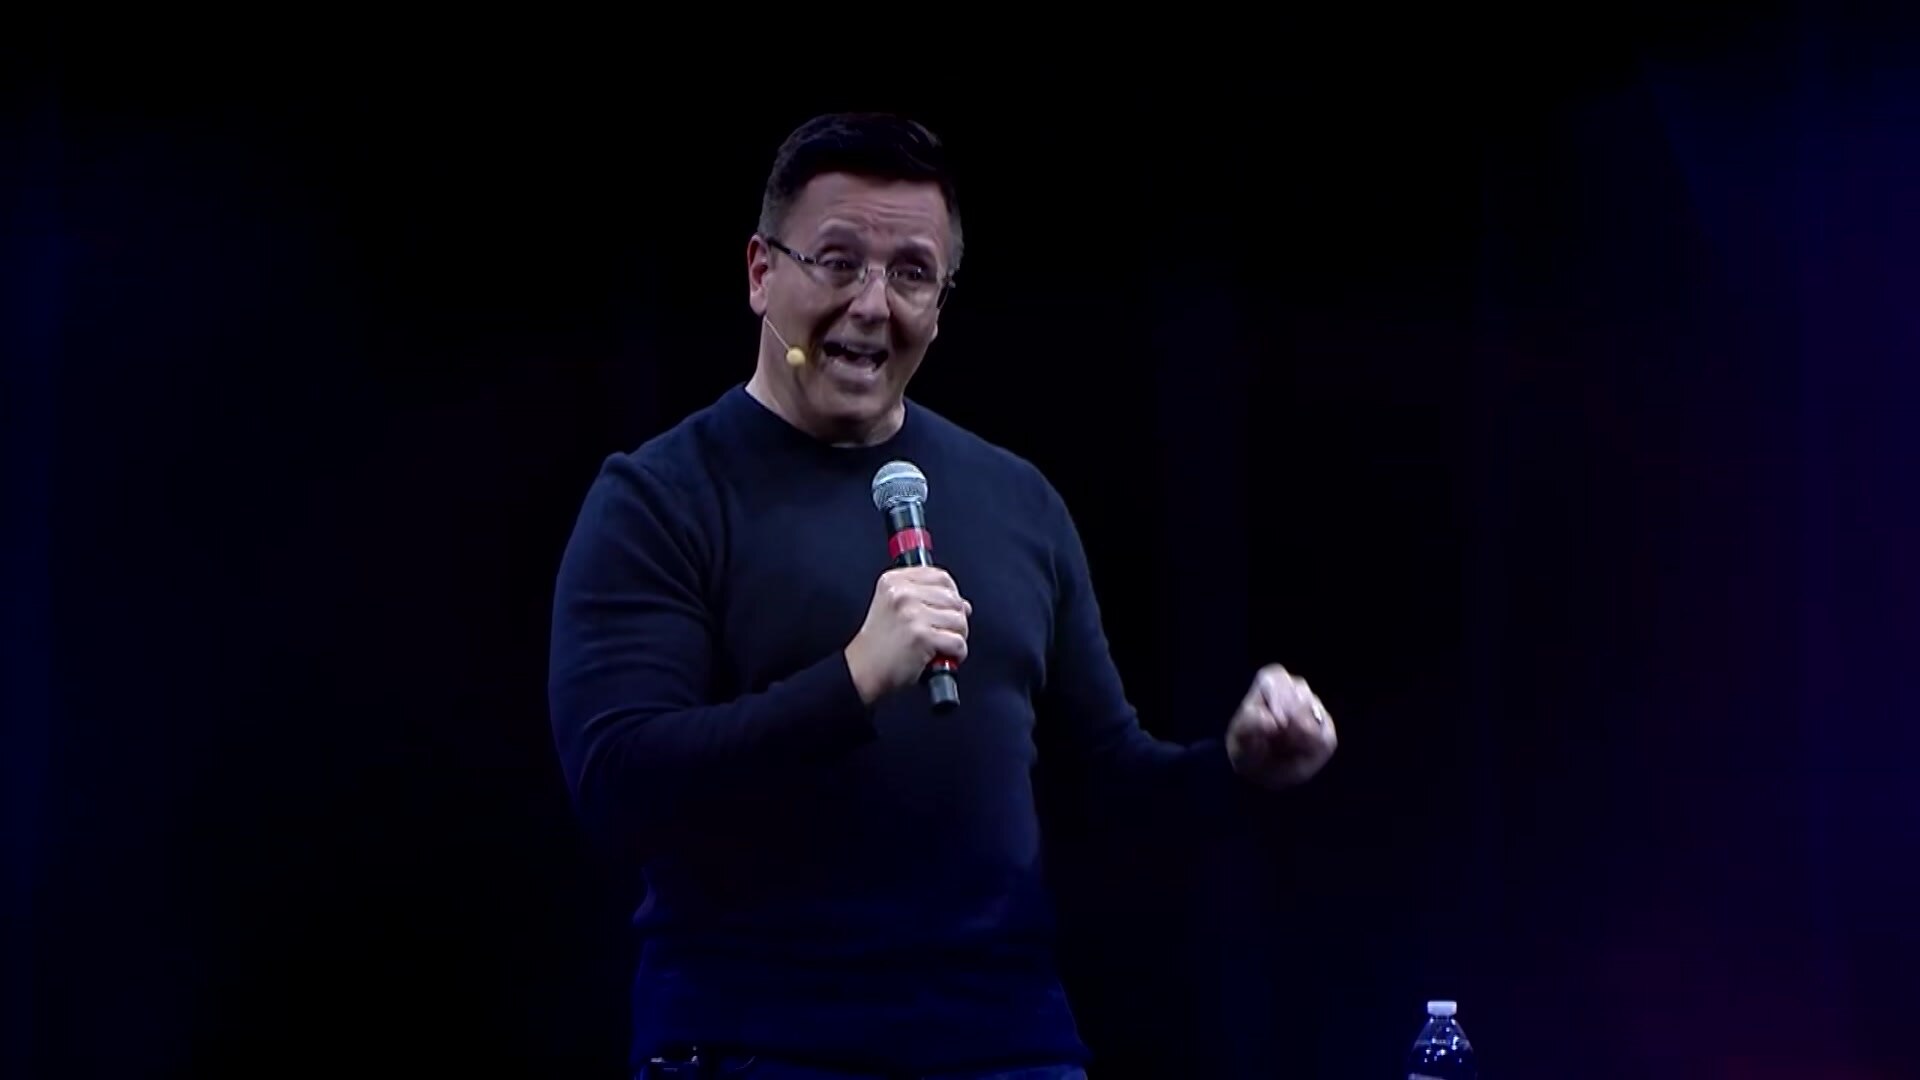 TV psychic John Edward stands in a dark room, holding a microphone, speaking to a crowd. He wears glasses and a dark jumper.